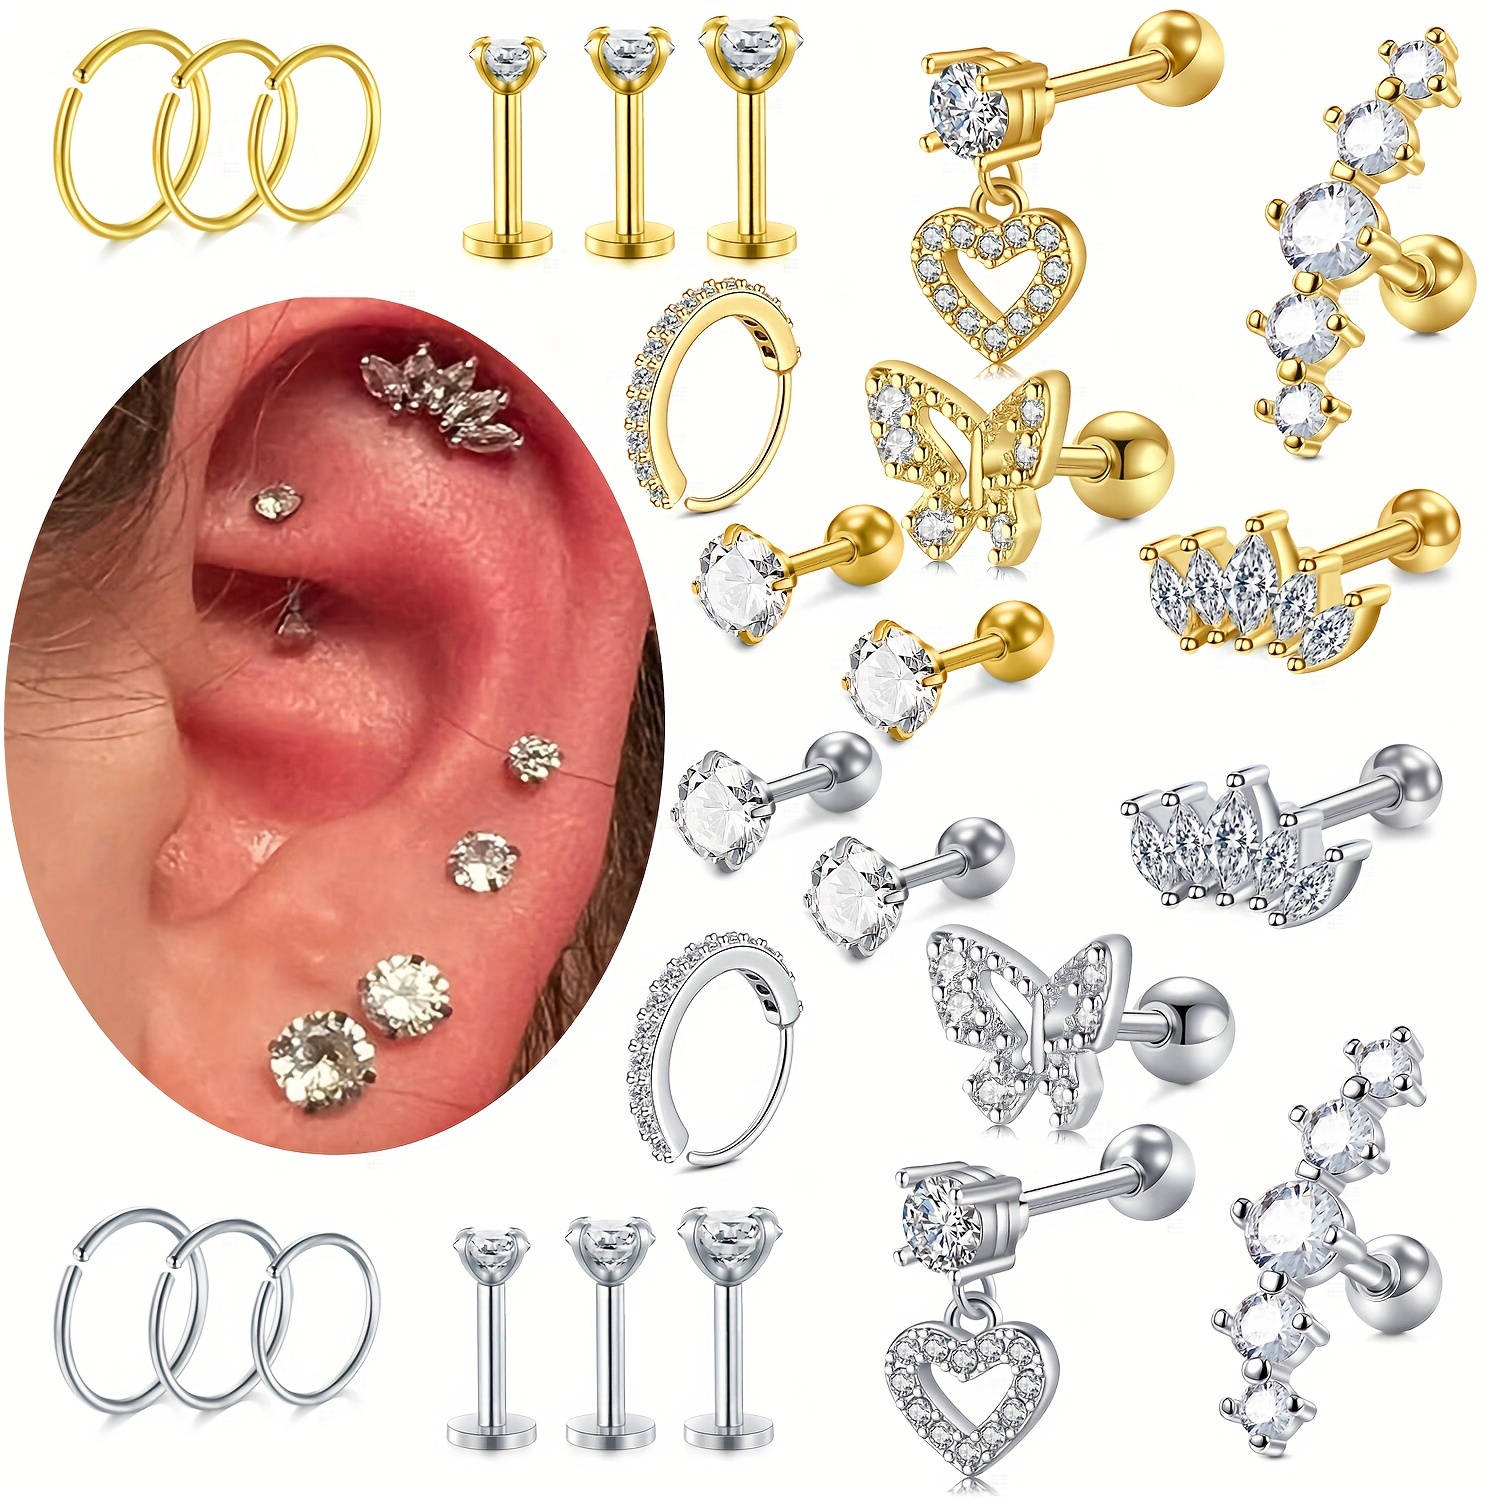 

316l Stainless Steel Cartilage Earrings Set Inlaid Shiny Zircon Exquisite Elegant Ear Piercing Jewelry Set